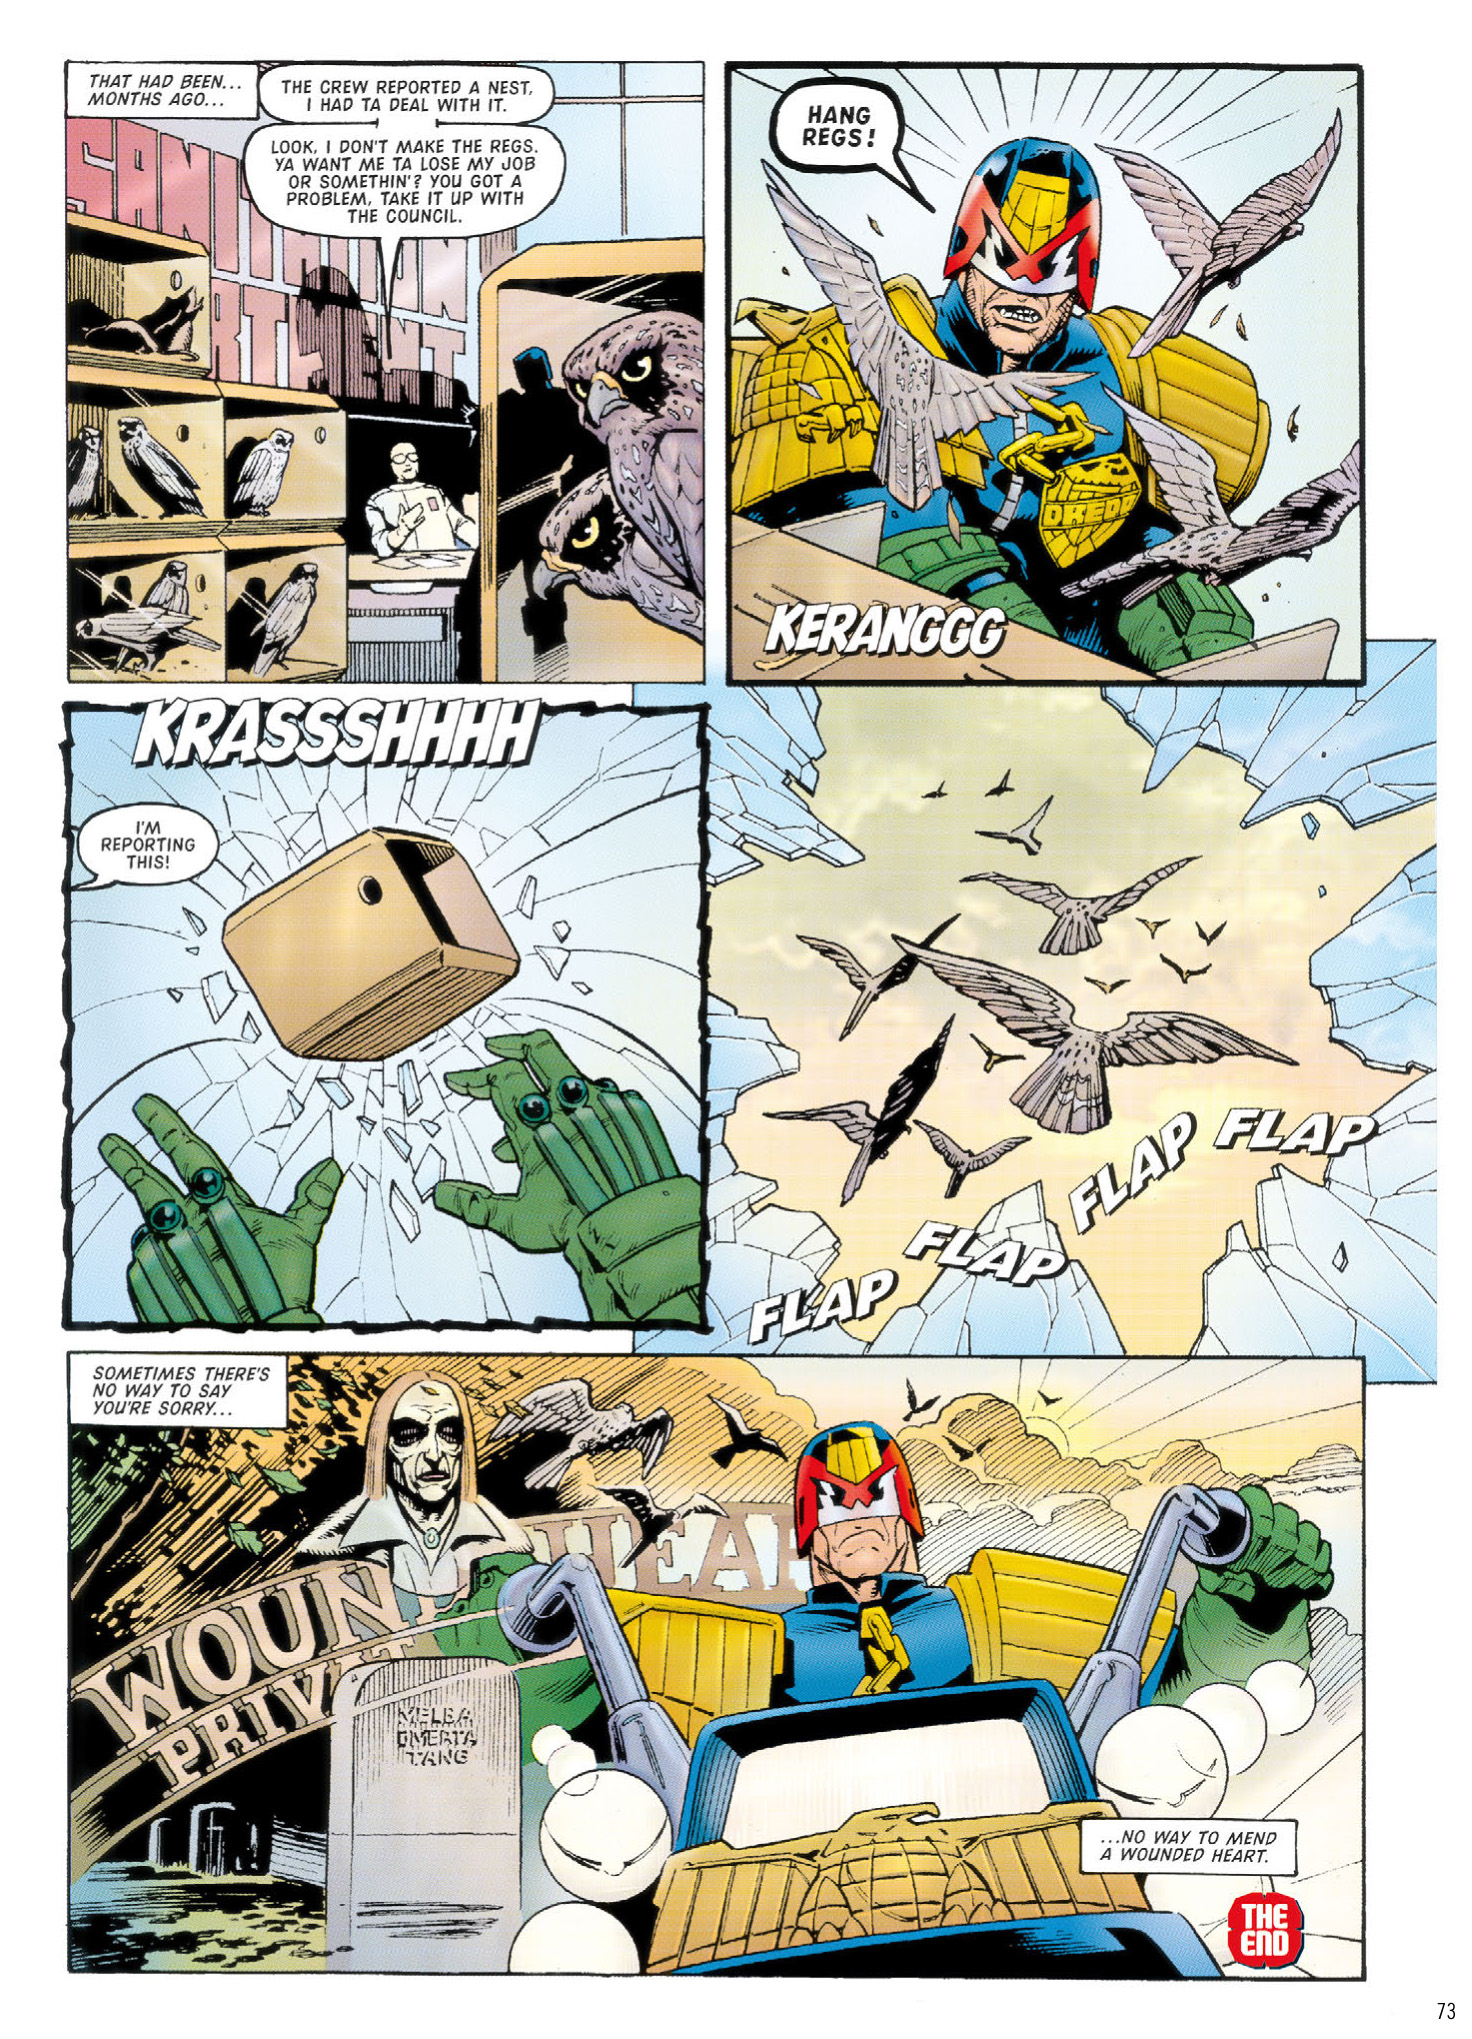 Read online Judge Dredd: The Complete Case Files comic -  Issue # TPB 29 - 75